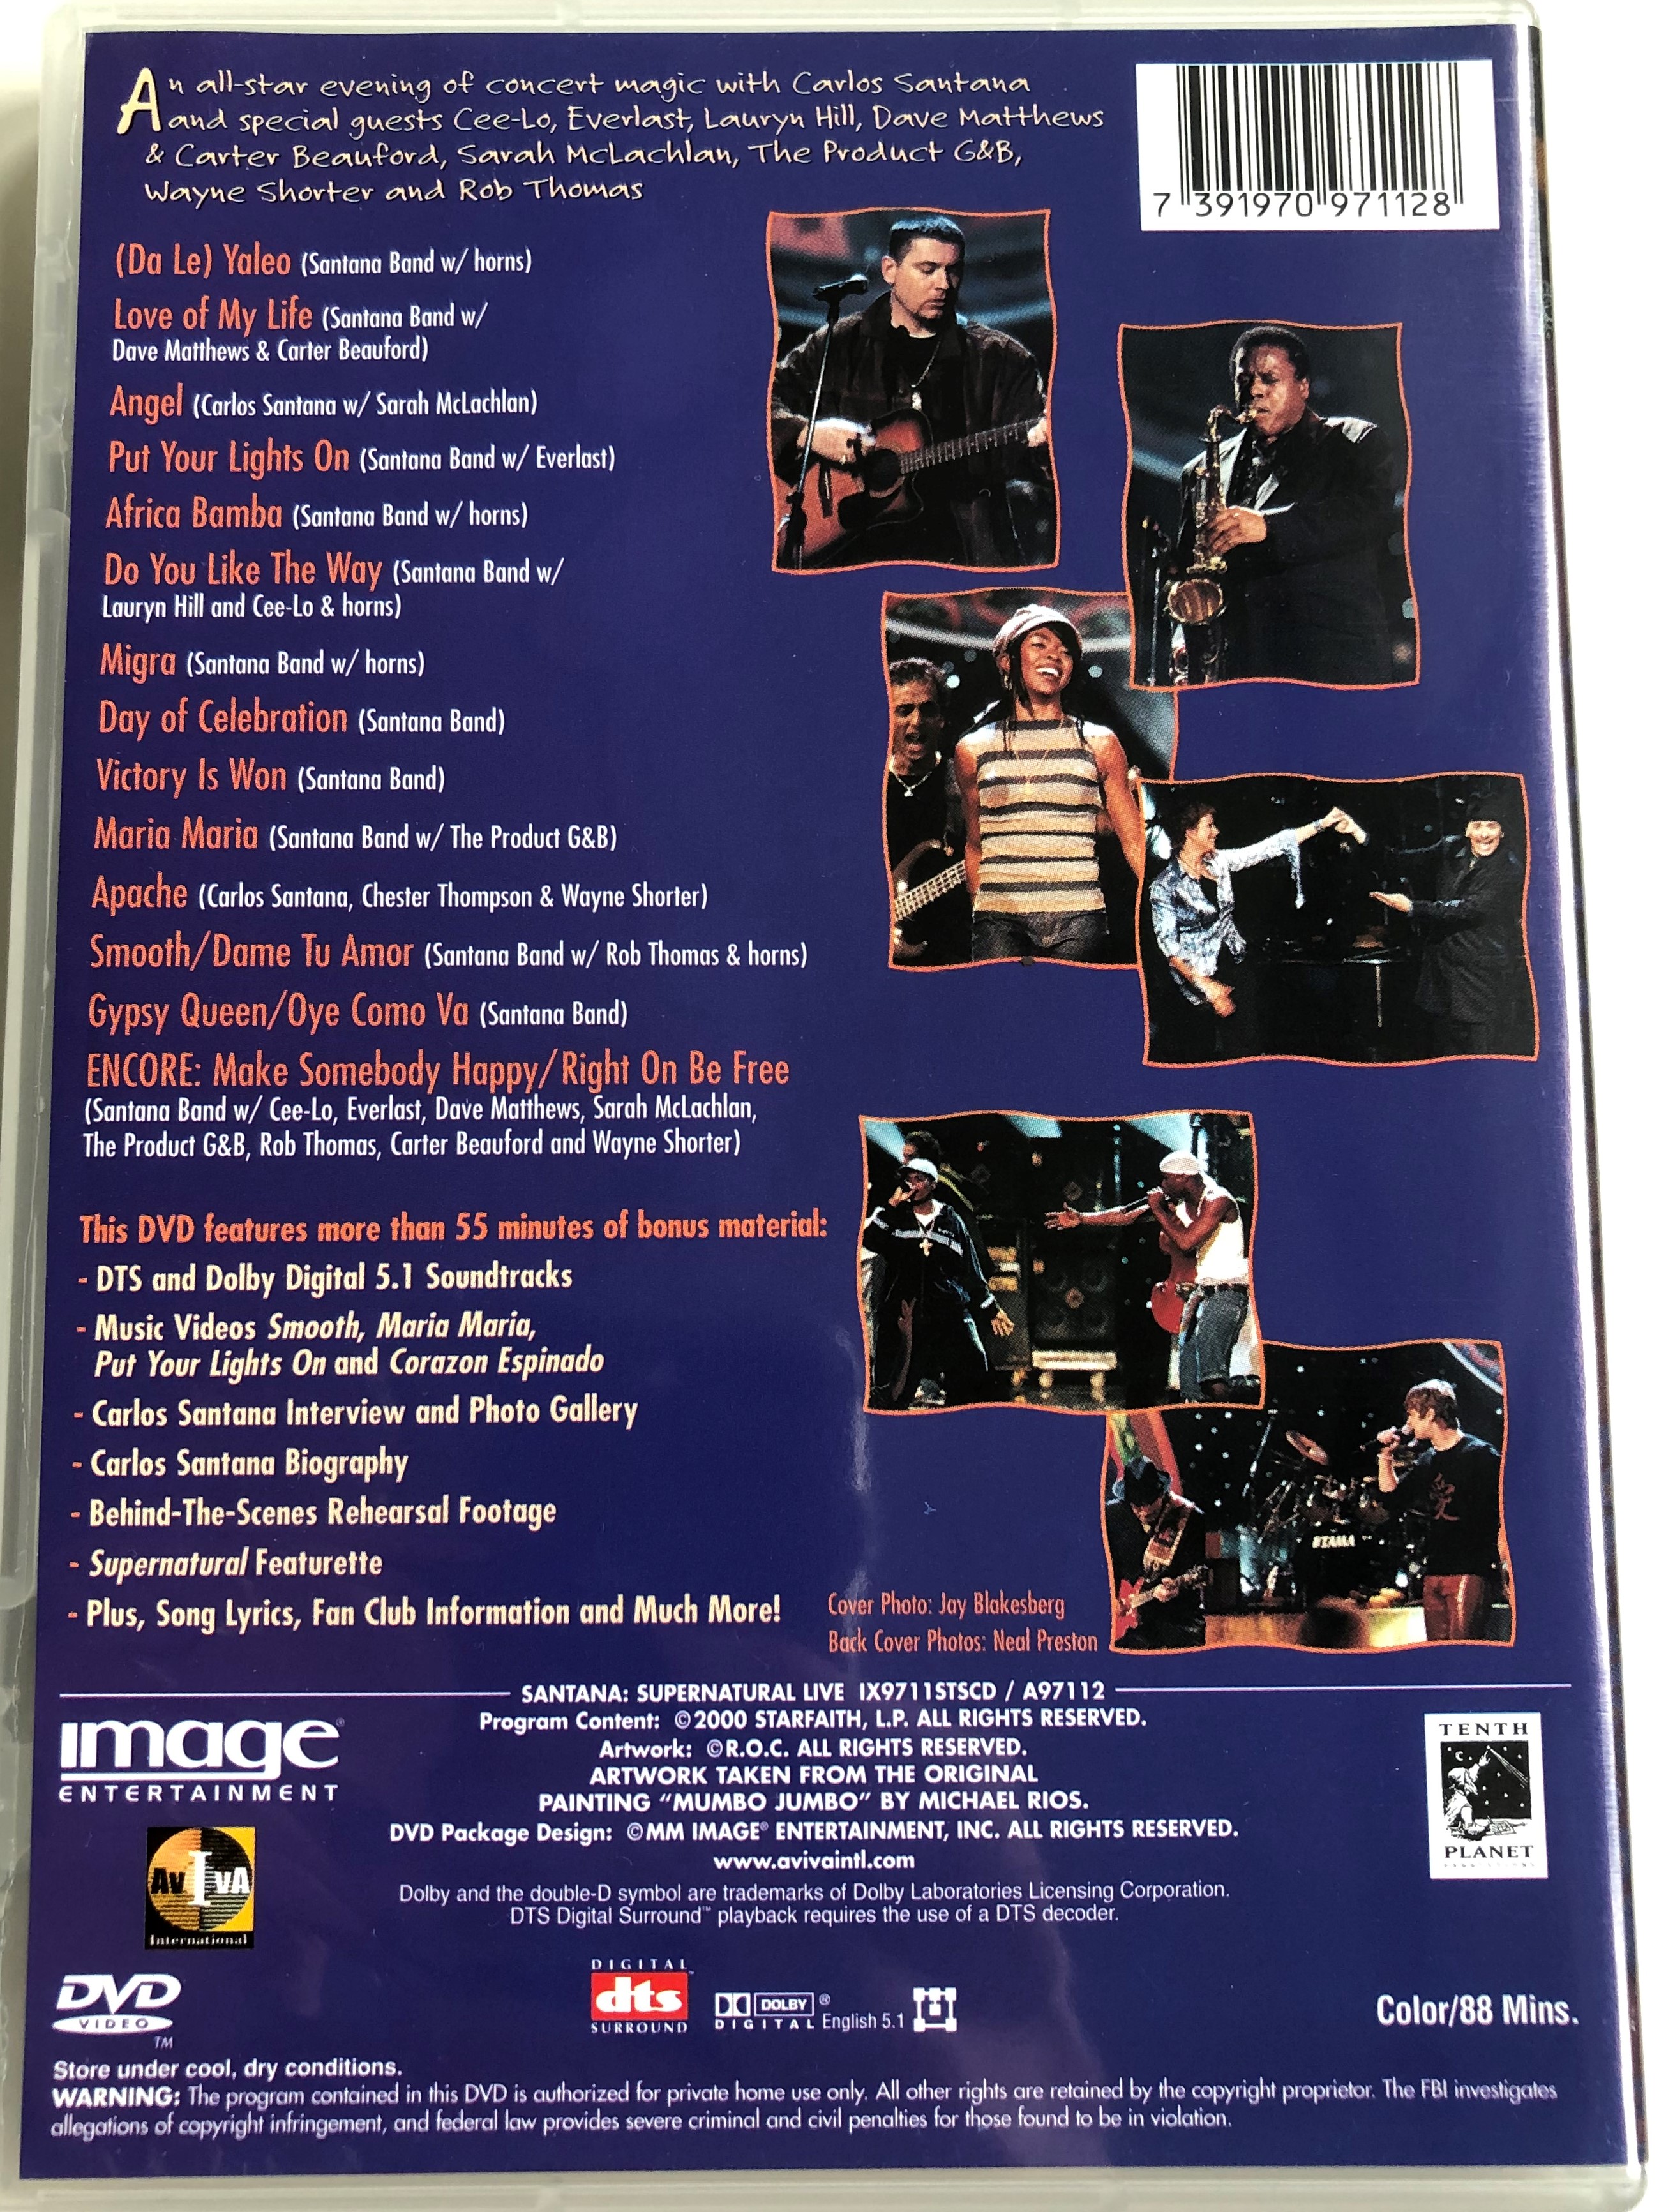 Santana DVD 2000 Supernatural LIVE / An evening with Carlos Santana and  Friends / Love of my Life, Put your Lights on, Migra, Victory is Won, Gypsy  Queen / Oye como va - bibleinmylanguage